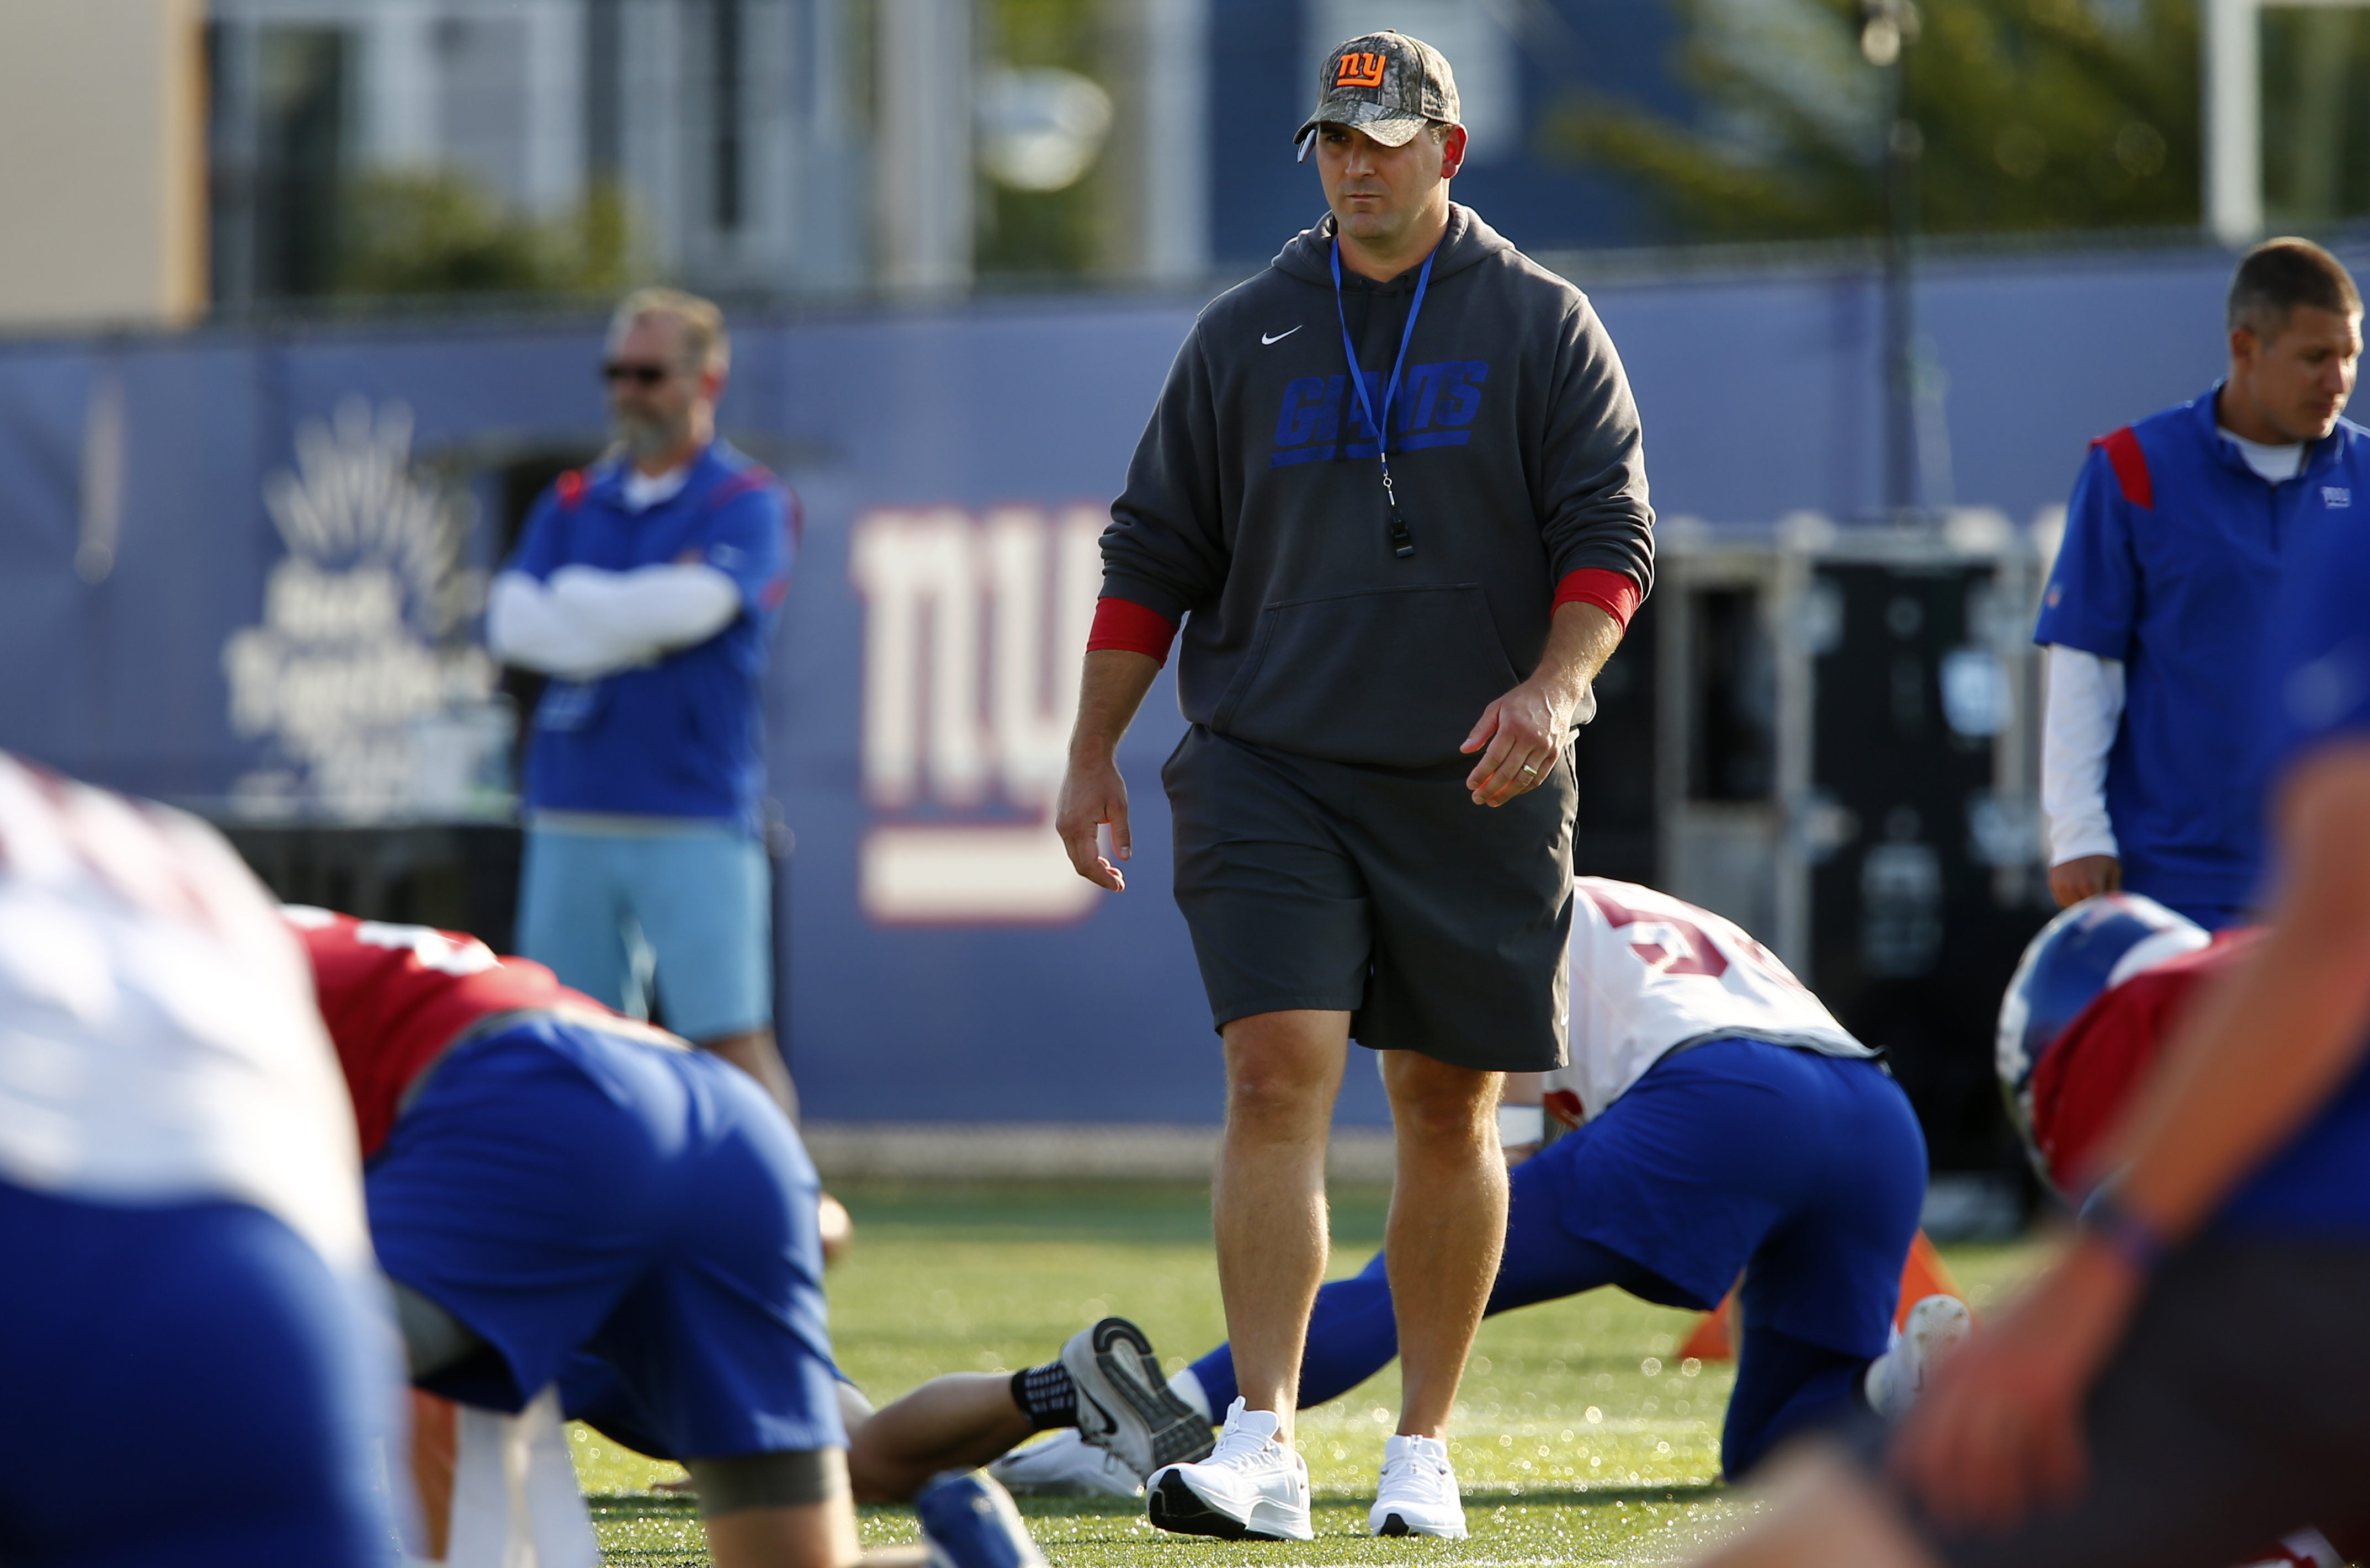 Joe Judge and Giants have fun as training camp winds down